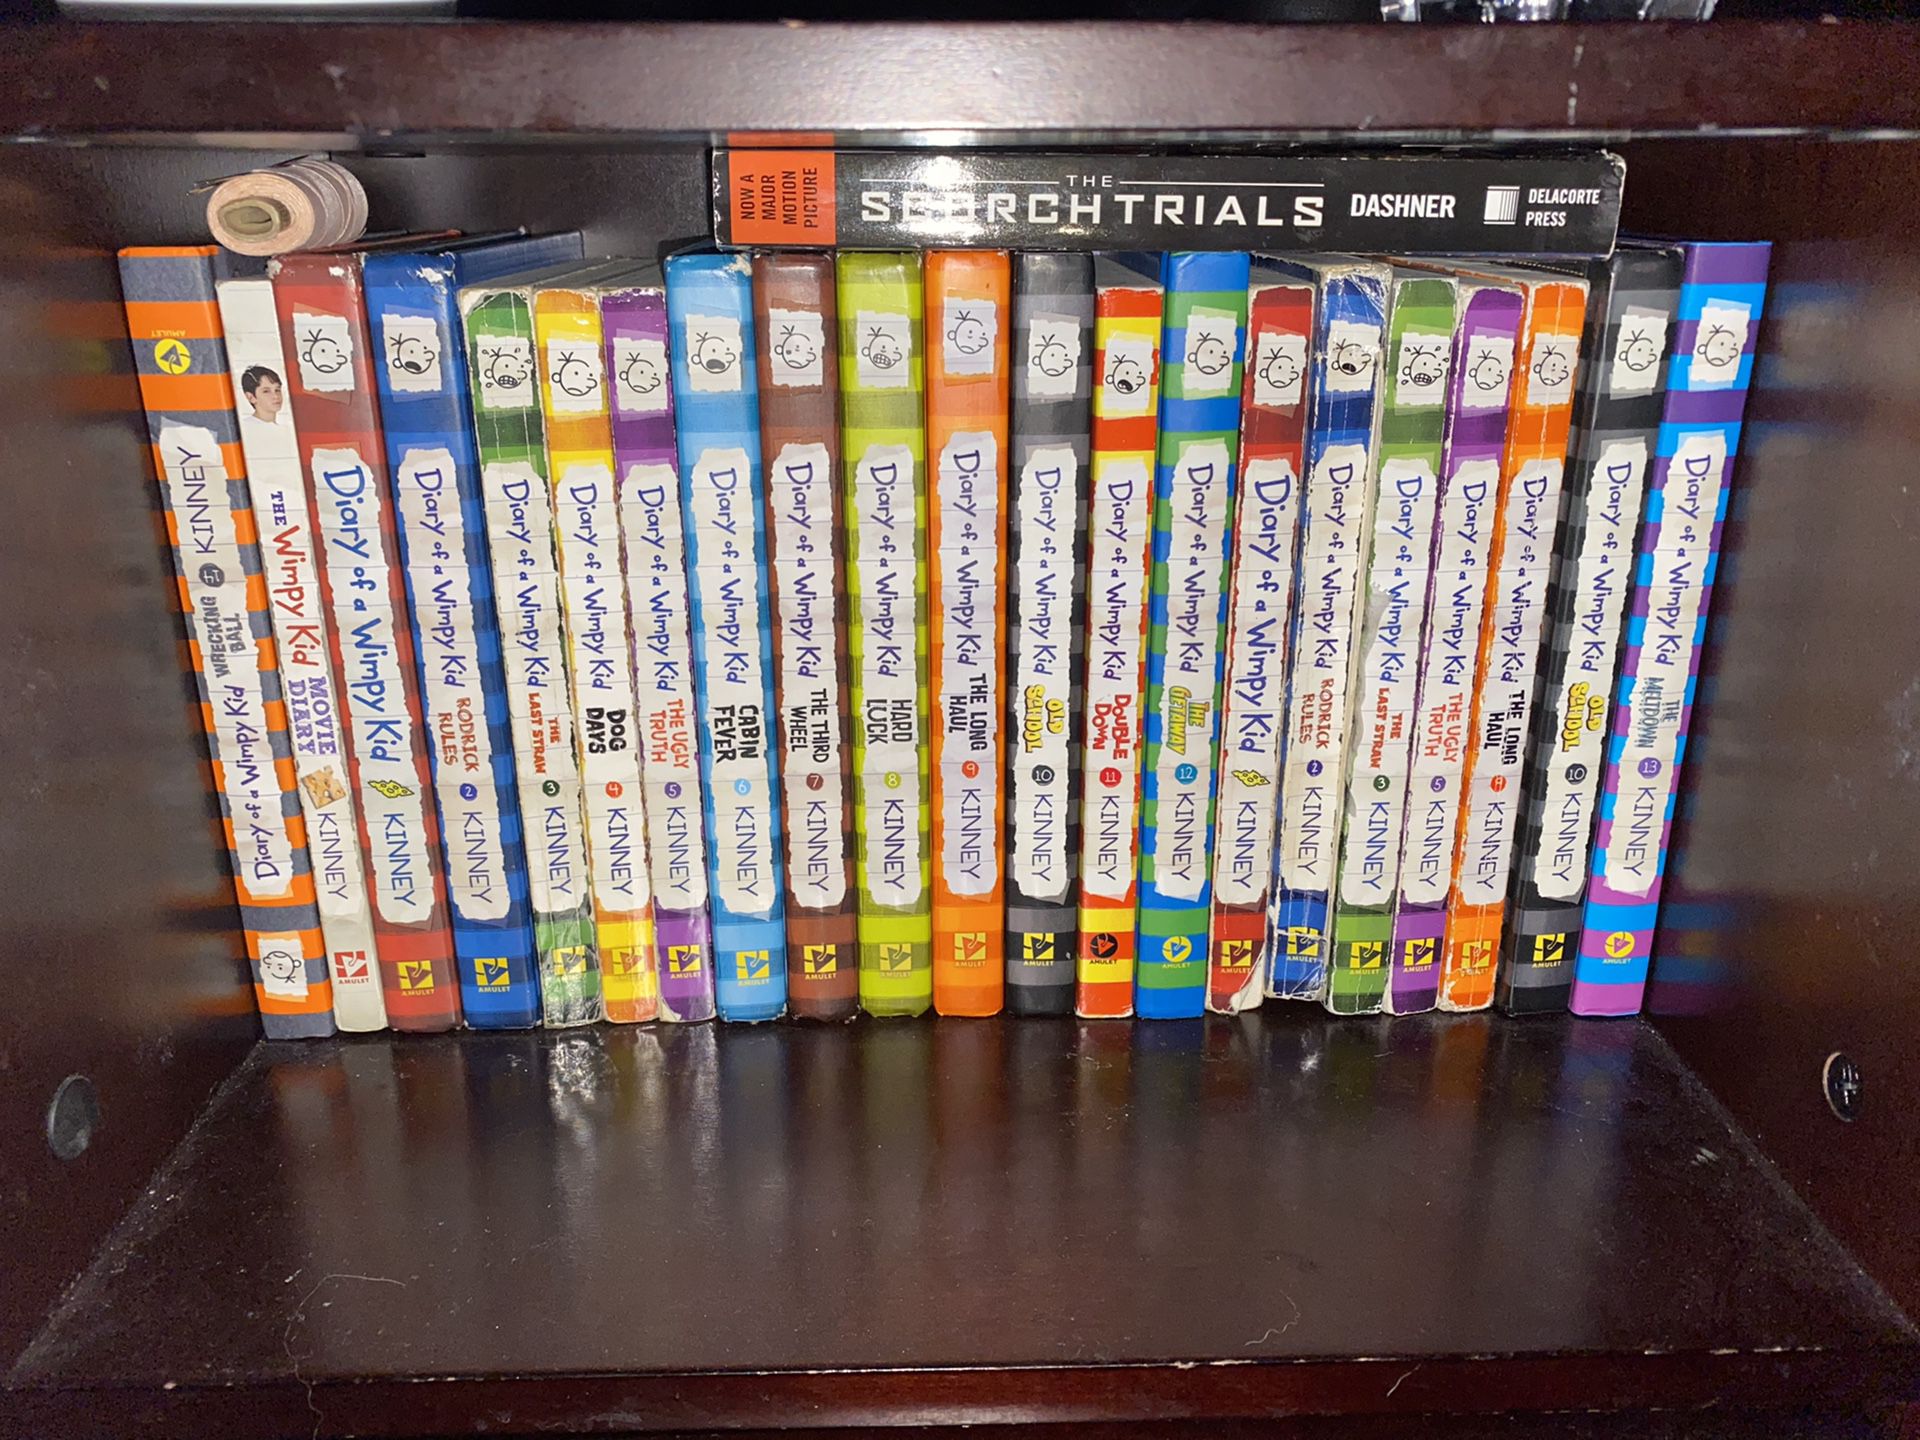 “Diary of a wimpy kid” entire book collection